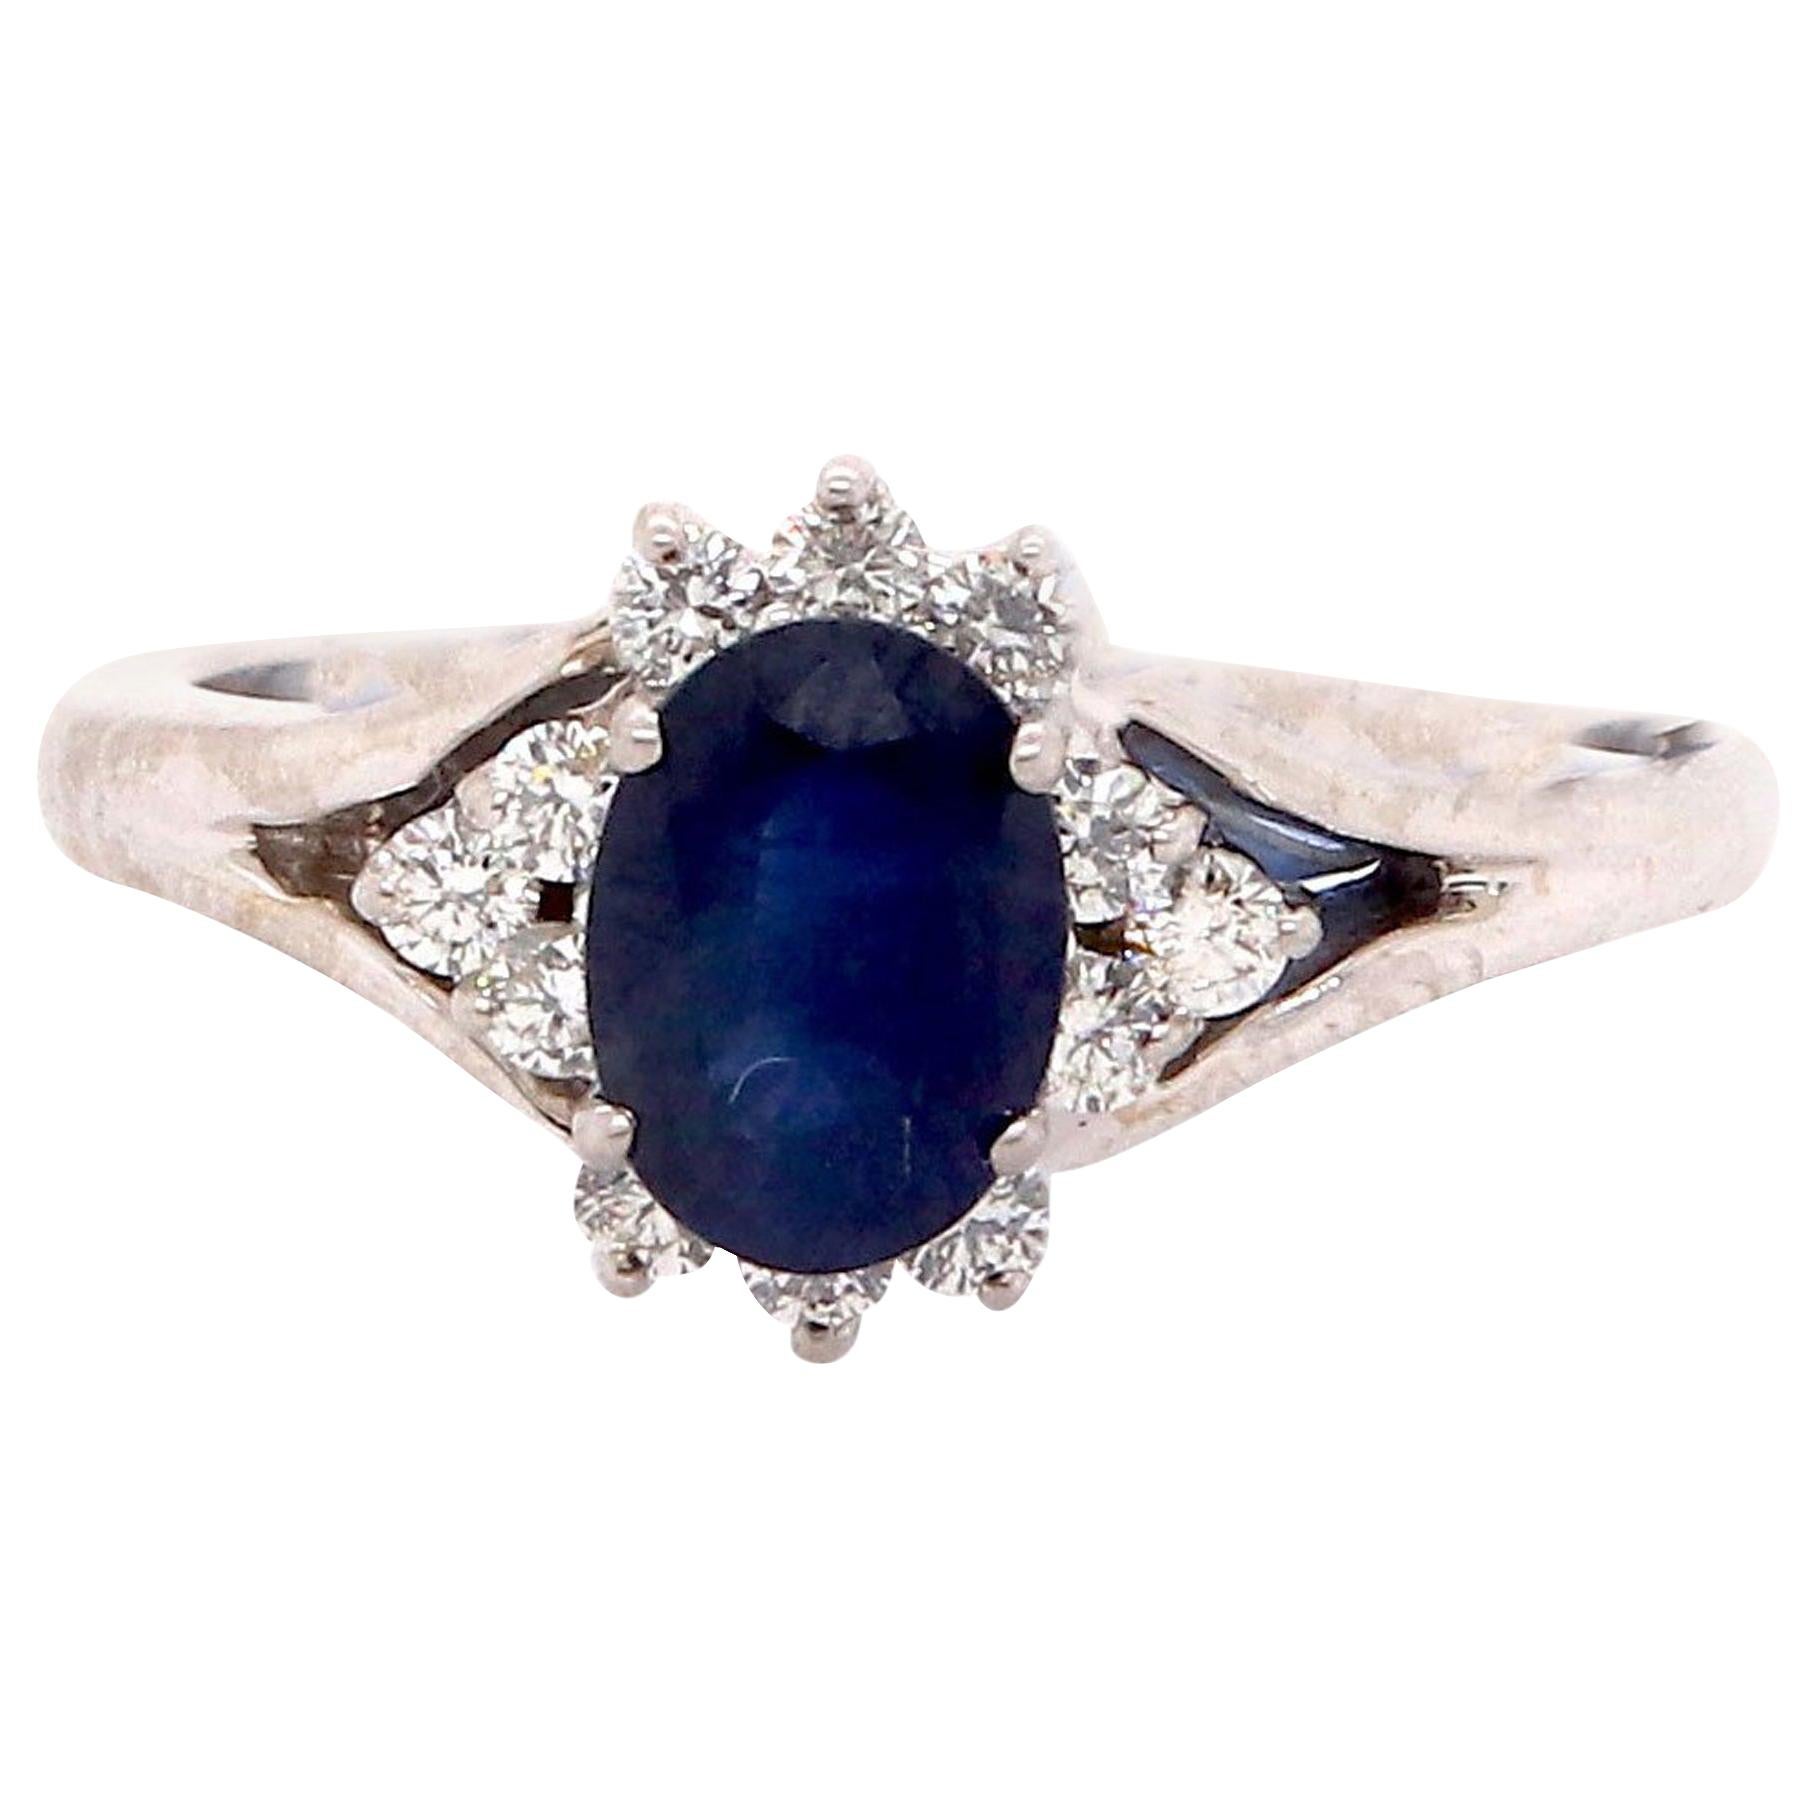 Oval Blue Sapphire Halo Engagement Ring